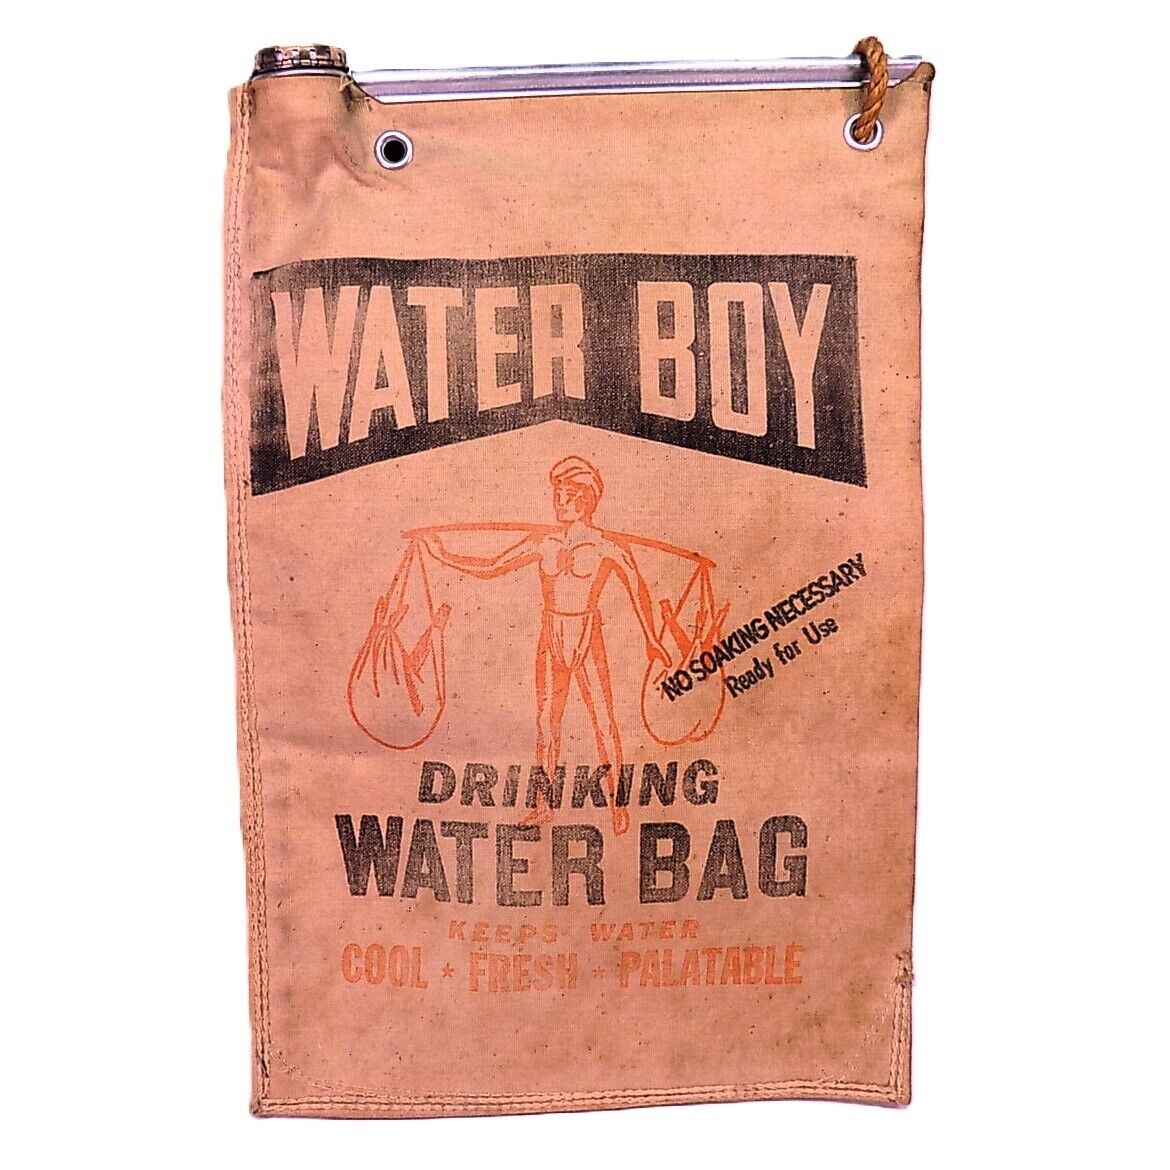 Vintage 1940's WATER BOY Canvas Drinking Water Bag with Metal Cap, Very Clean